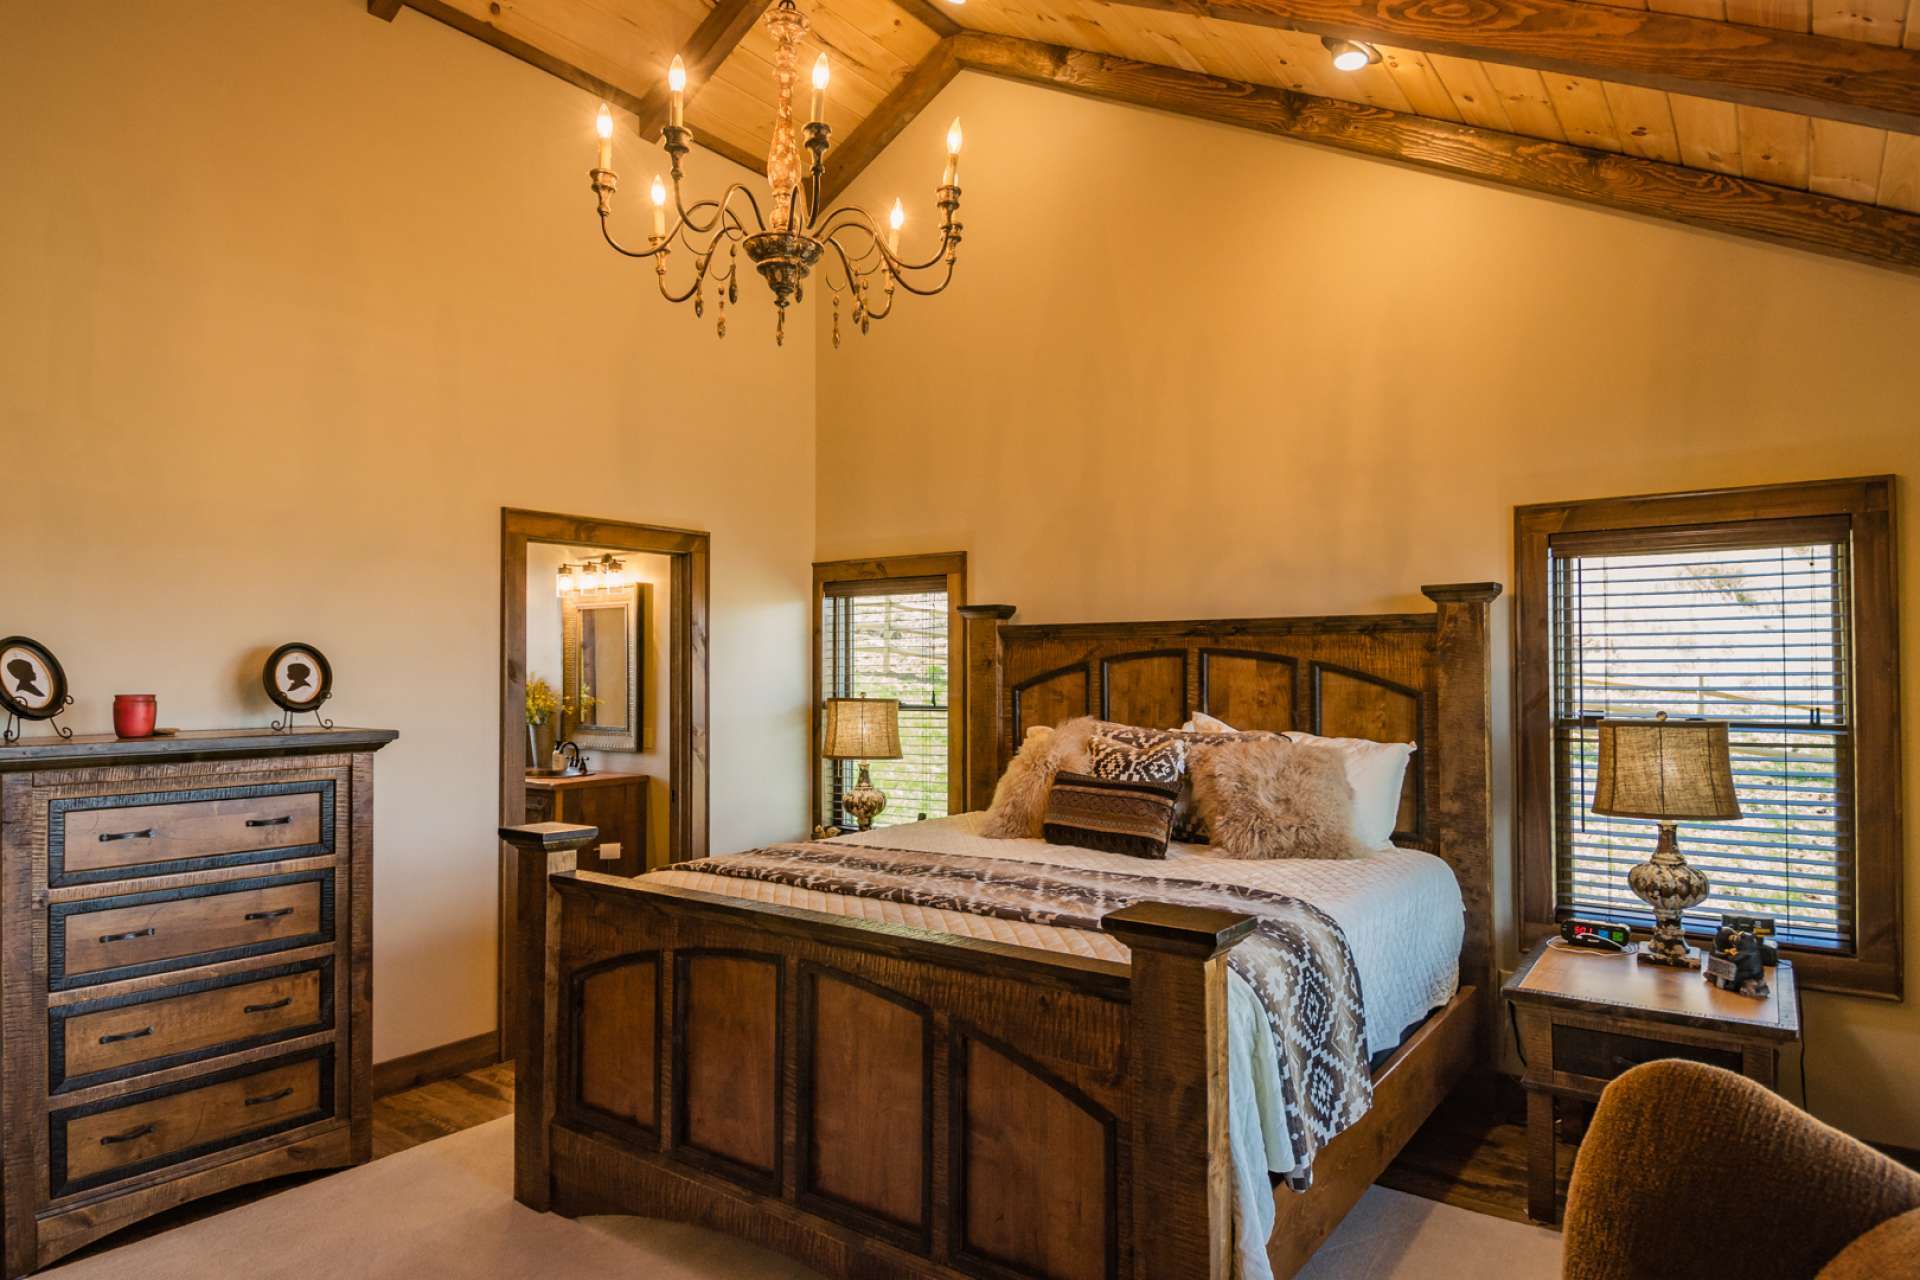 A spacious master suite is located on the main level and features  a private bath and  private access to the  open deck, perfect place to greet the day  with  morning's first cup of coffee or reflect at the end of the day with your favorite beverage.